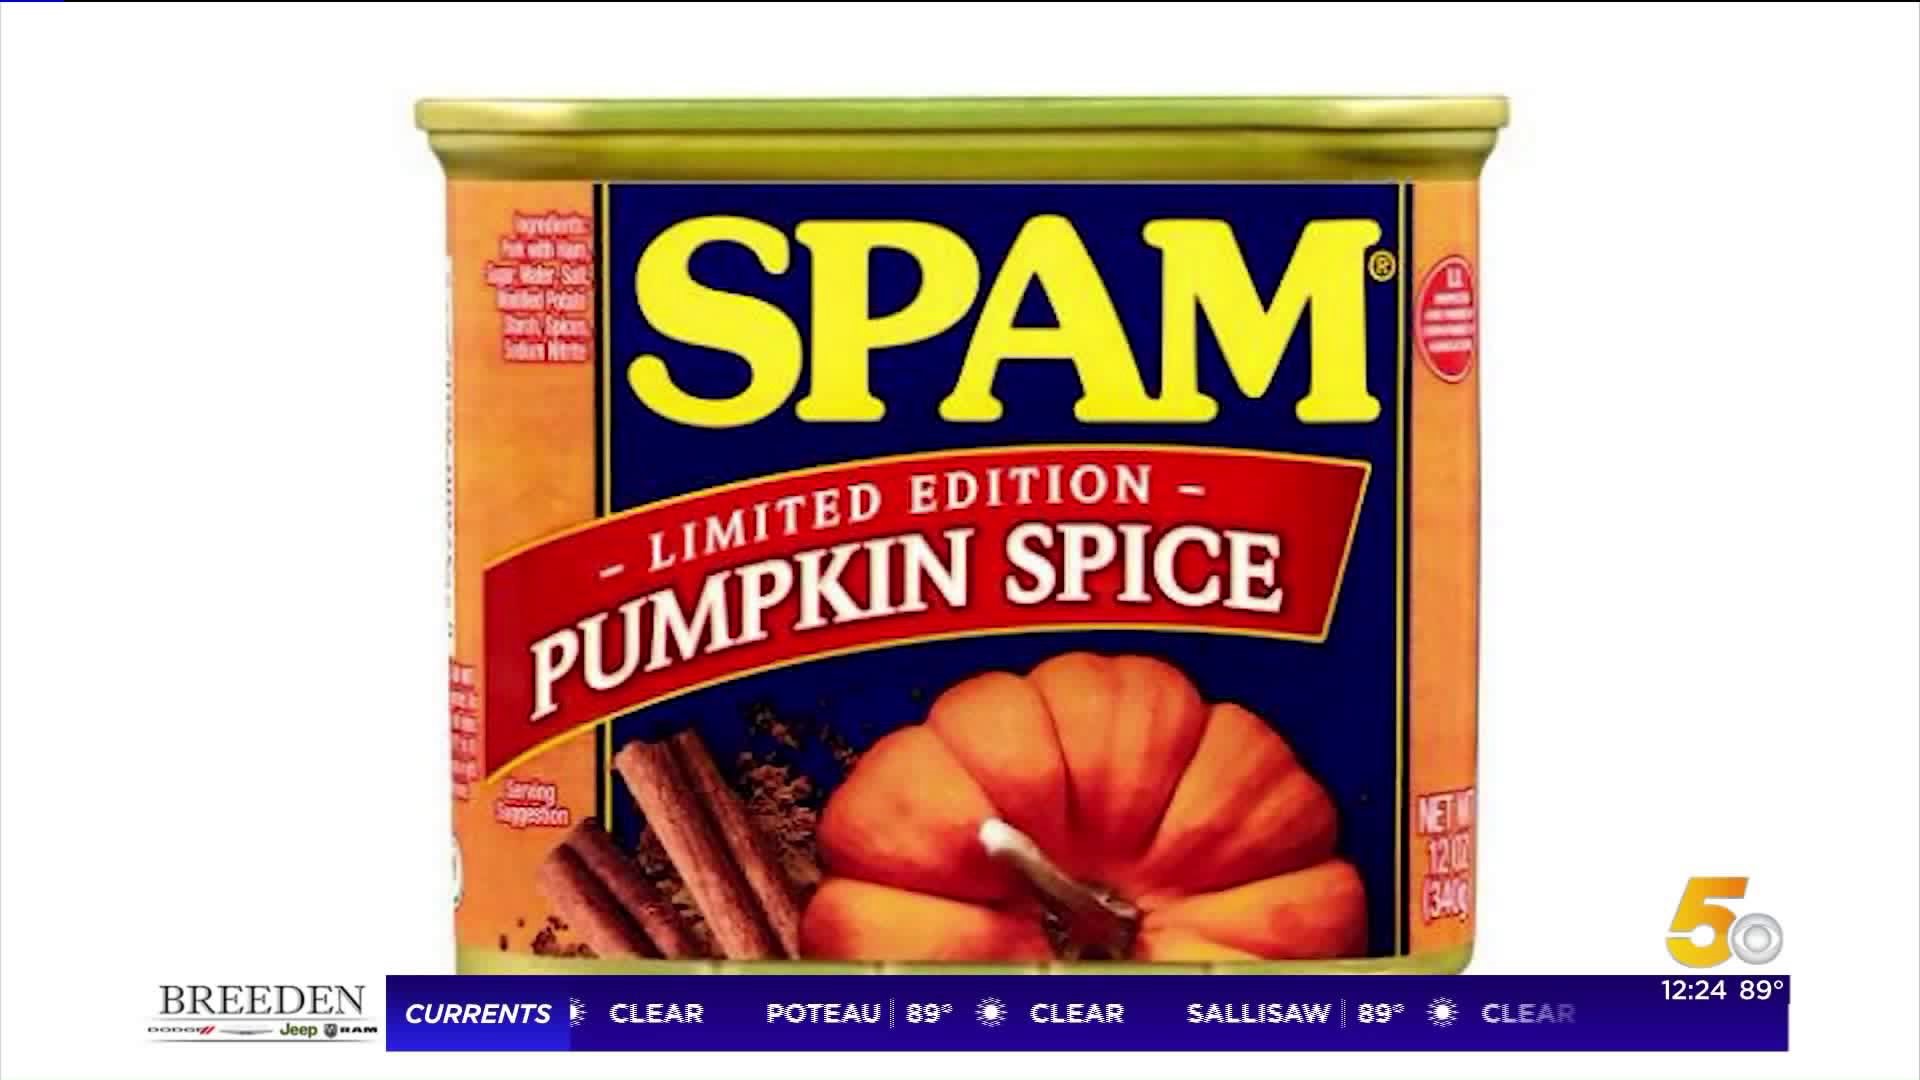 Pumpkin Spice Spam Coming This Fall